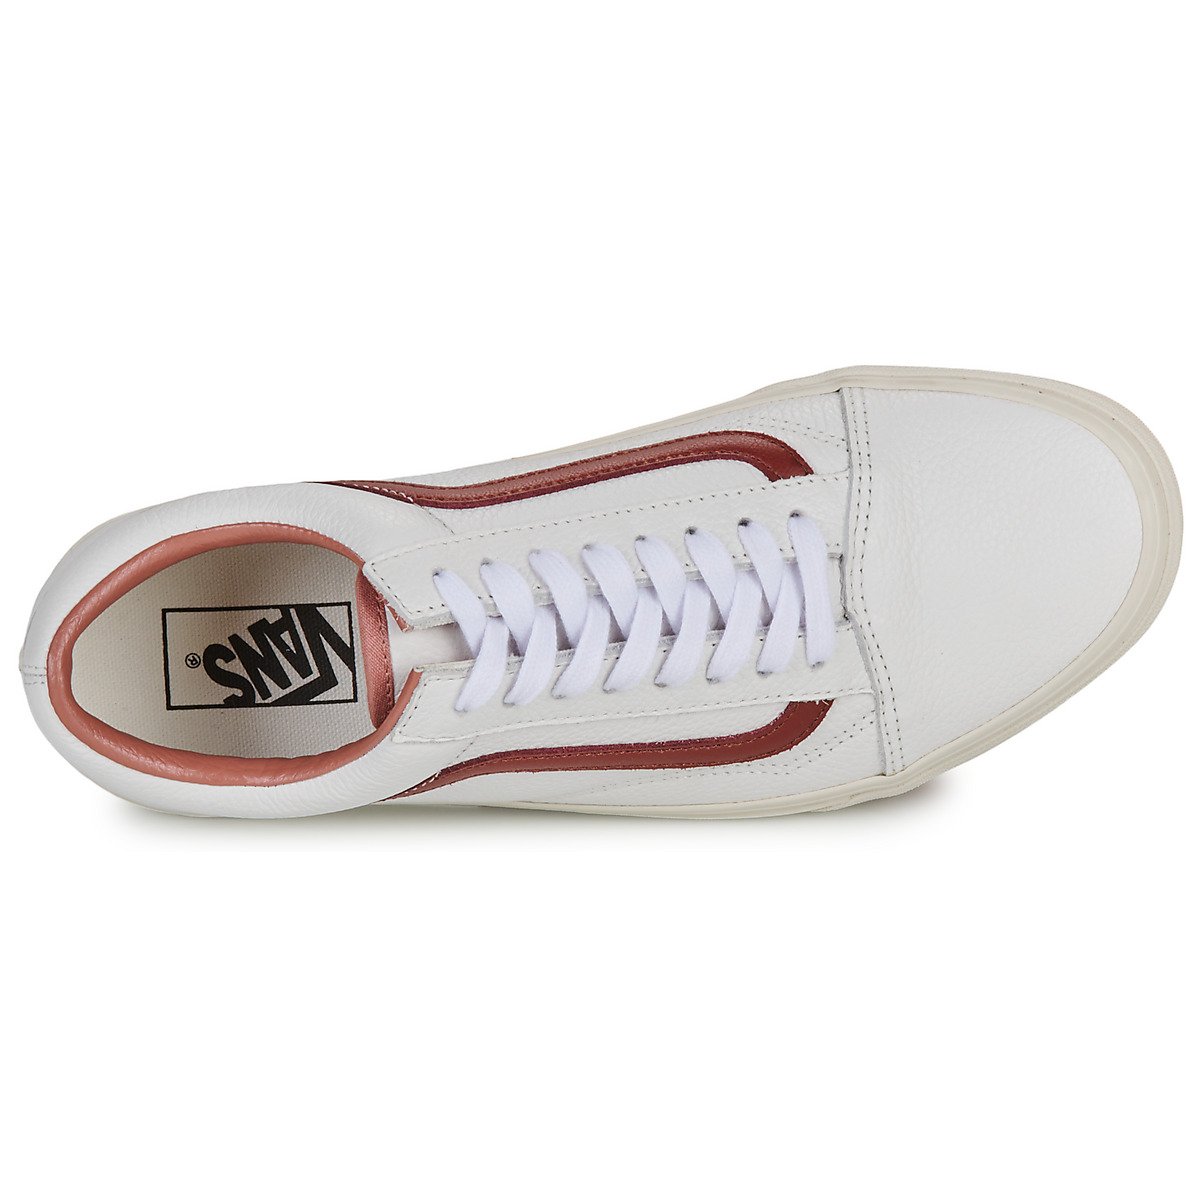 Shoes  Old Skool PREMIUM LEATHER RUSSET BROWN